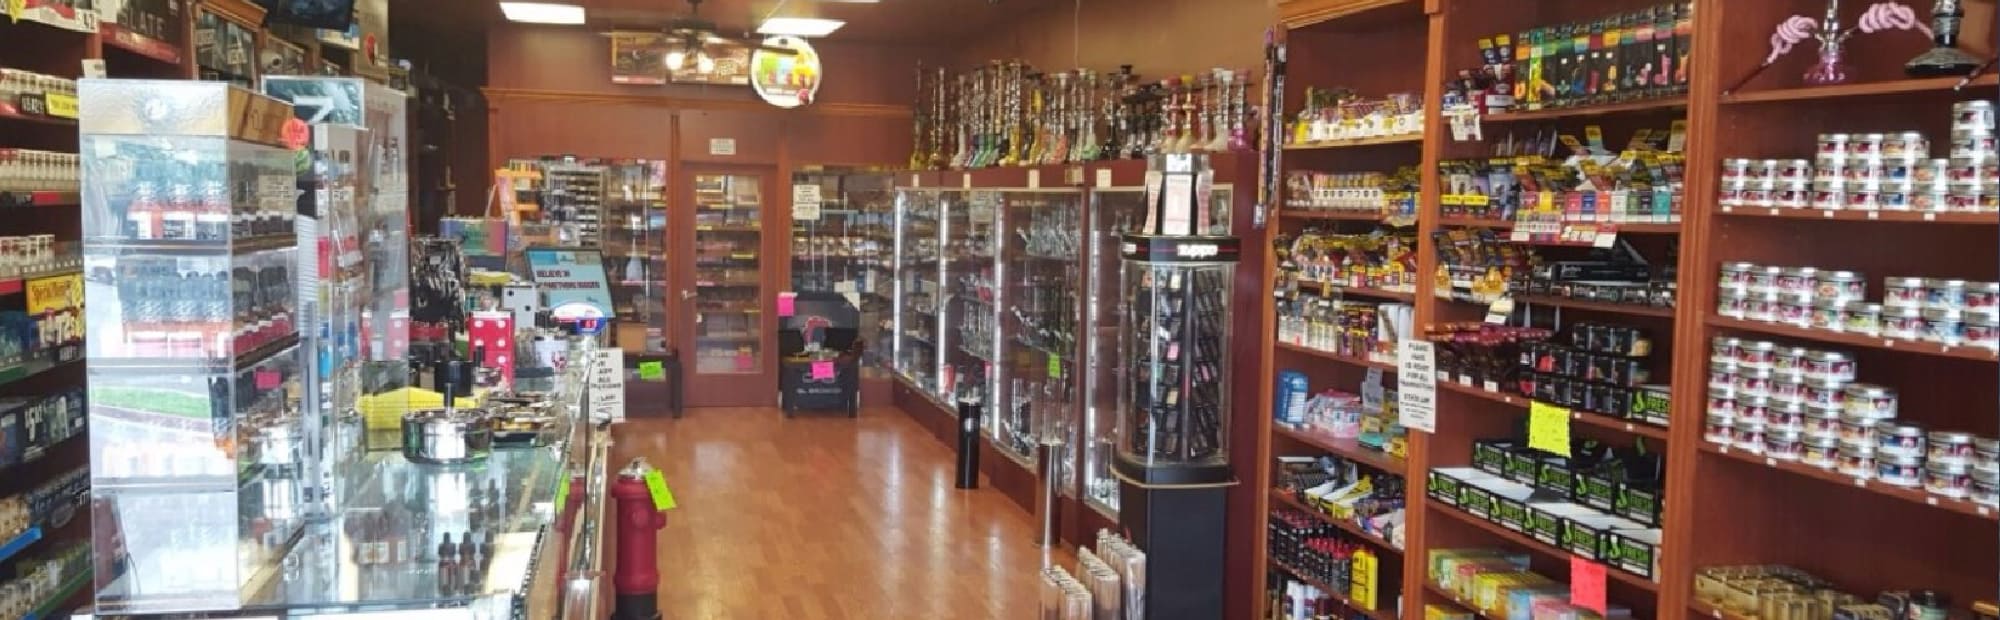 image of cigars and smoke in bakersfield ca